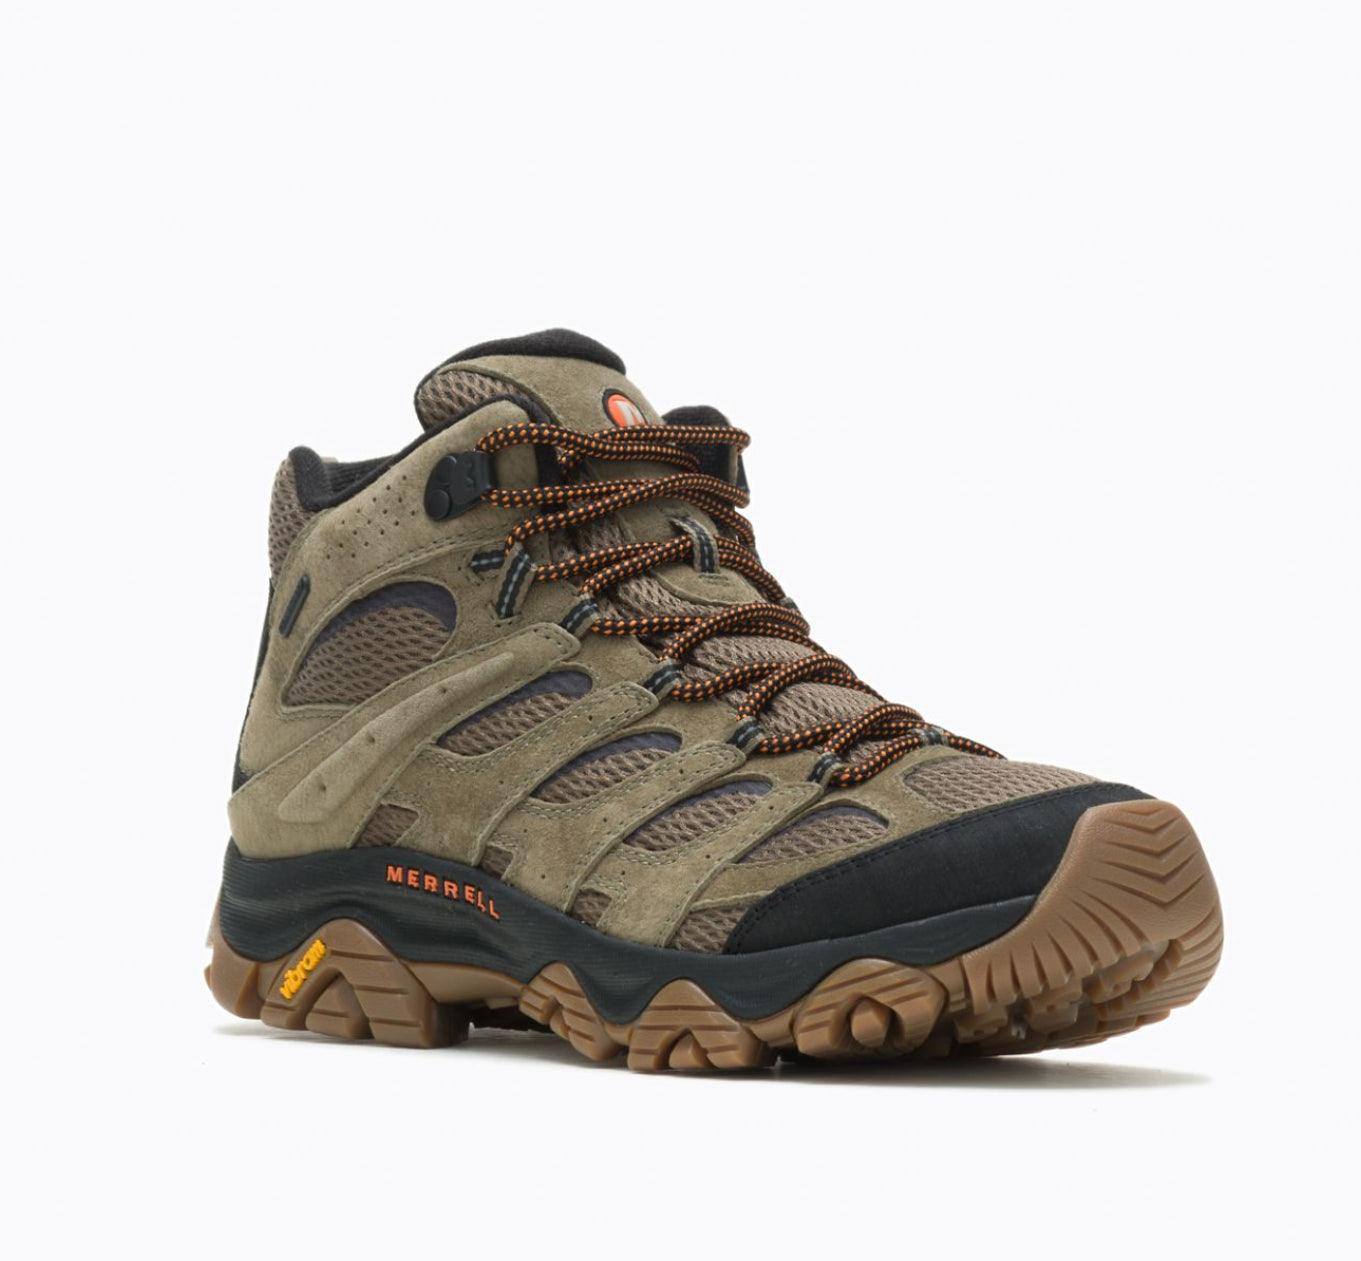 https://cdn.shopify.com/s/files/1/0386/4071/3868/products/mens-moab-3-mid-waterproof-hiking-shoemerrellthe-shoe-collective-631108.jpg?v=1696812682&width=1361